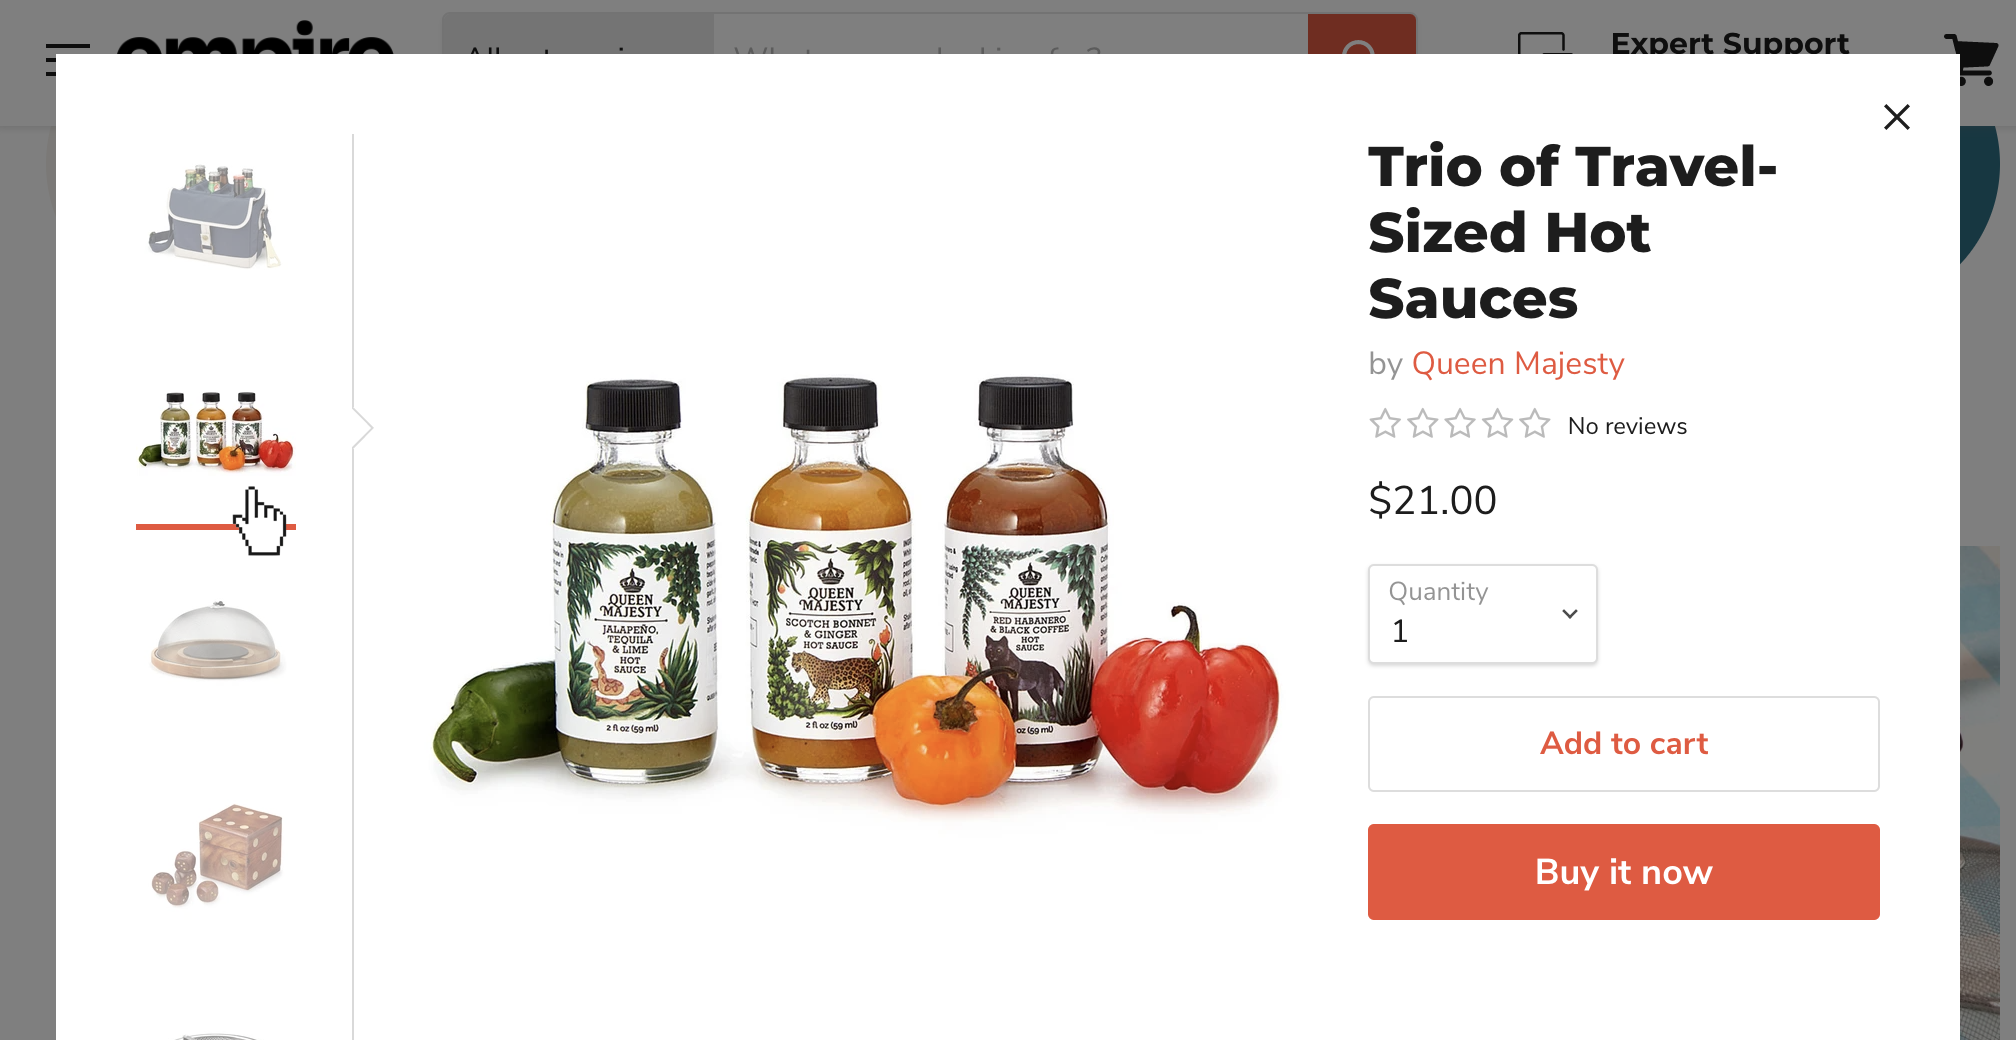 modal_window_for_the_products_included_in_the_shoppable_image_section.png